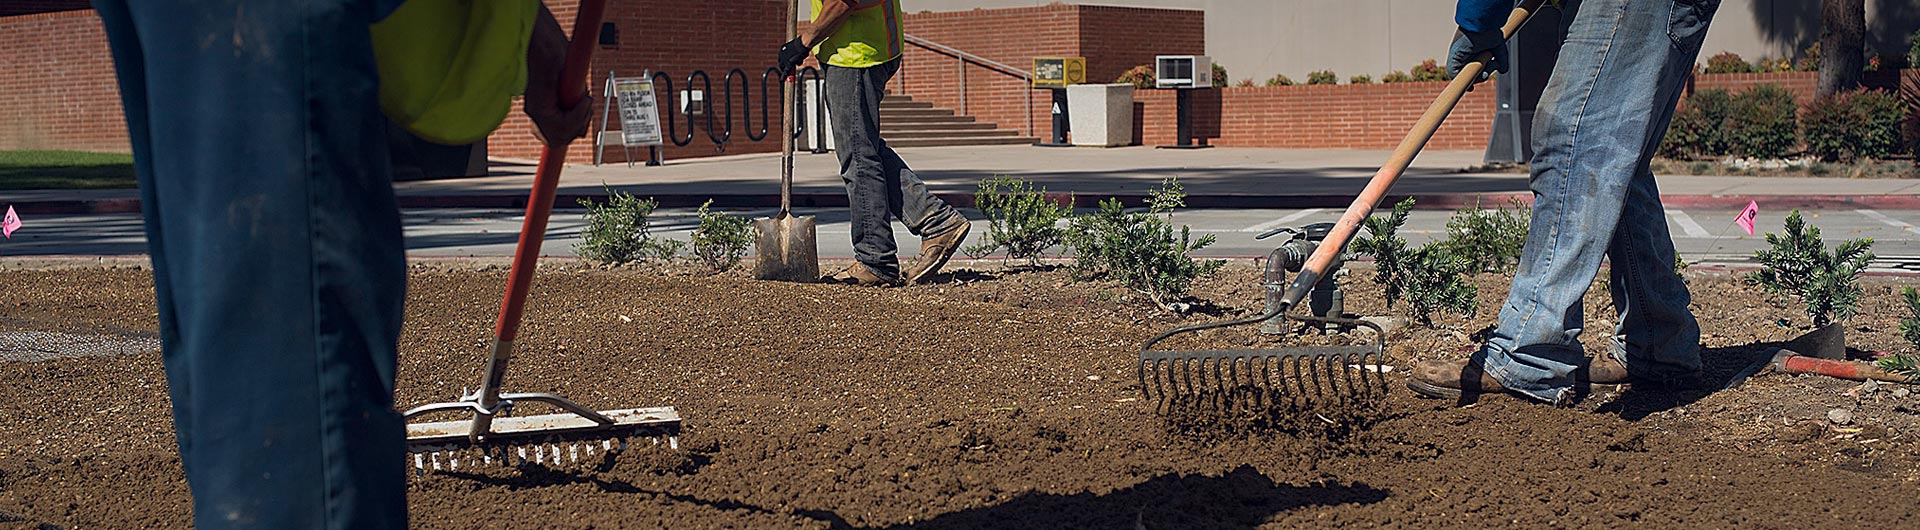 Landscaping workers on campus